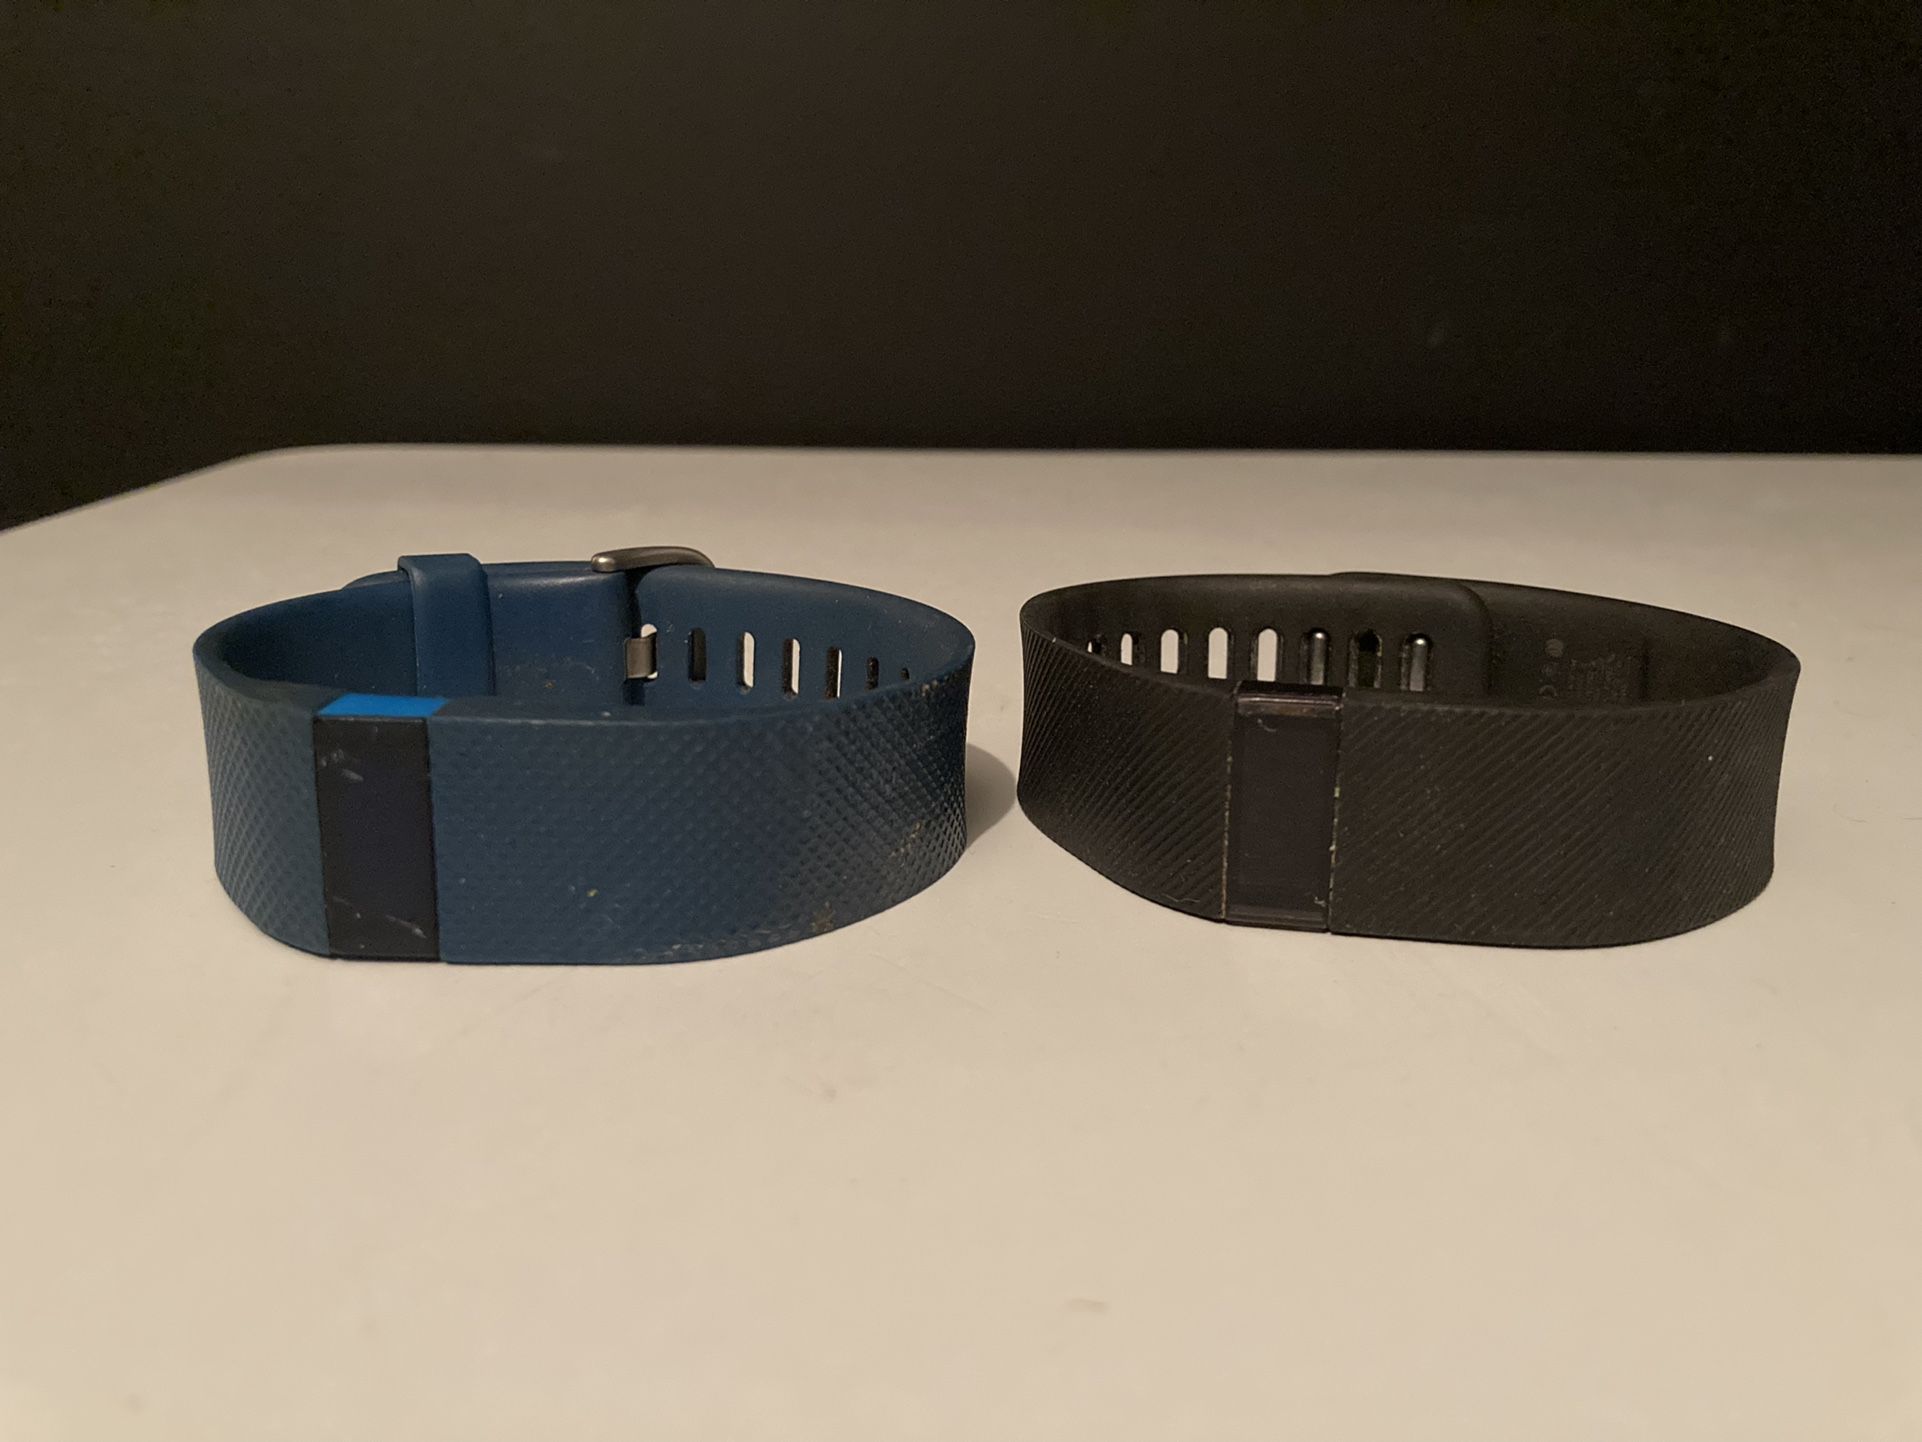  x2 Fitbit Charge HR Wireless Activity Tracker - Black & Navy